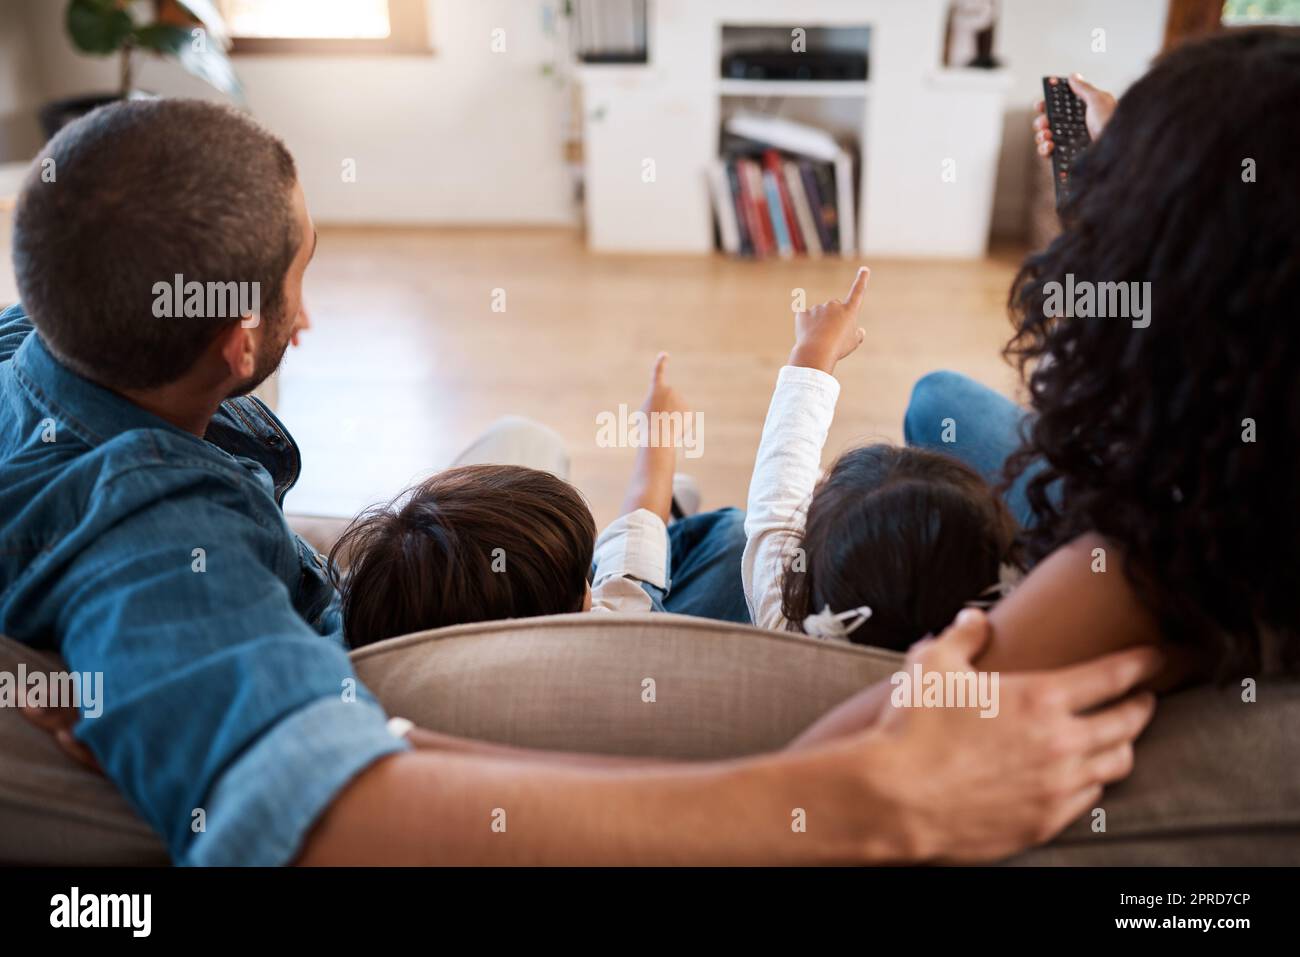 The kids always get to chose what to watch. Rearview shot of a couple watching something on the television with their two young kids. Stock Photo